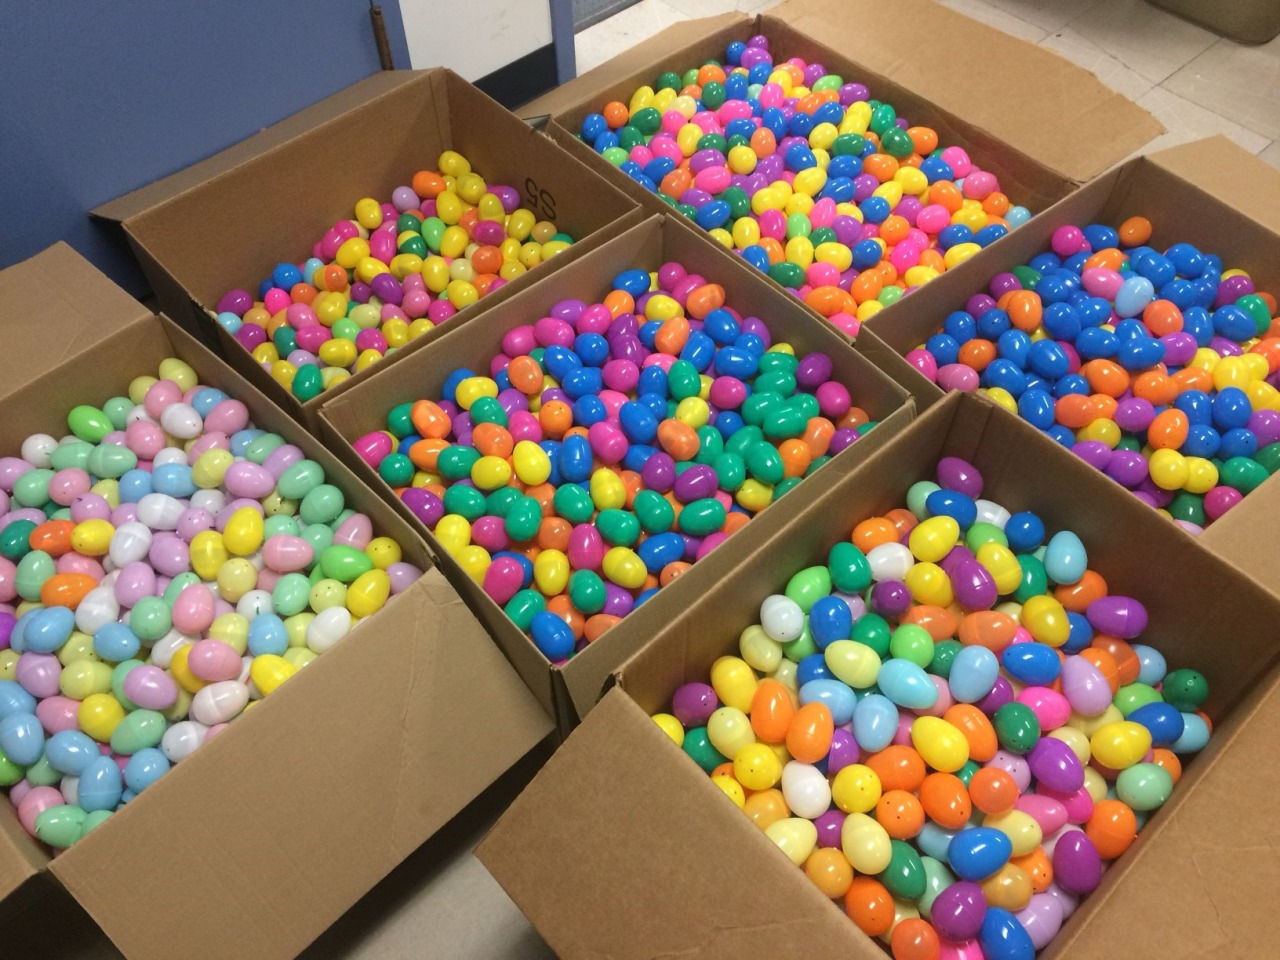 Boxes of colorful plastic eggs